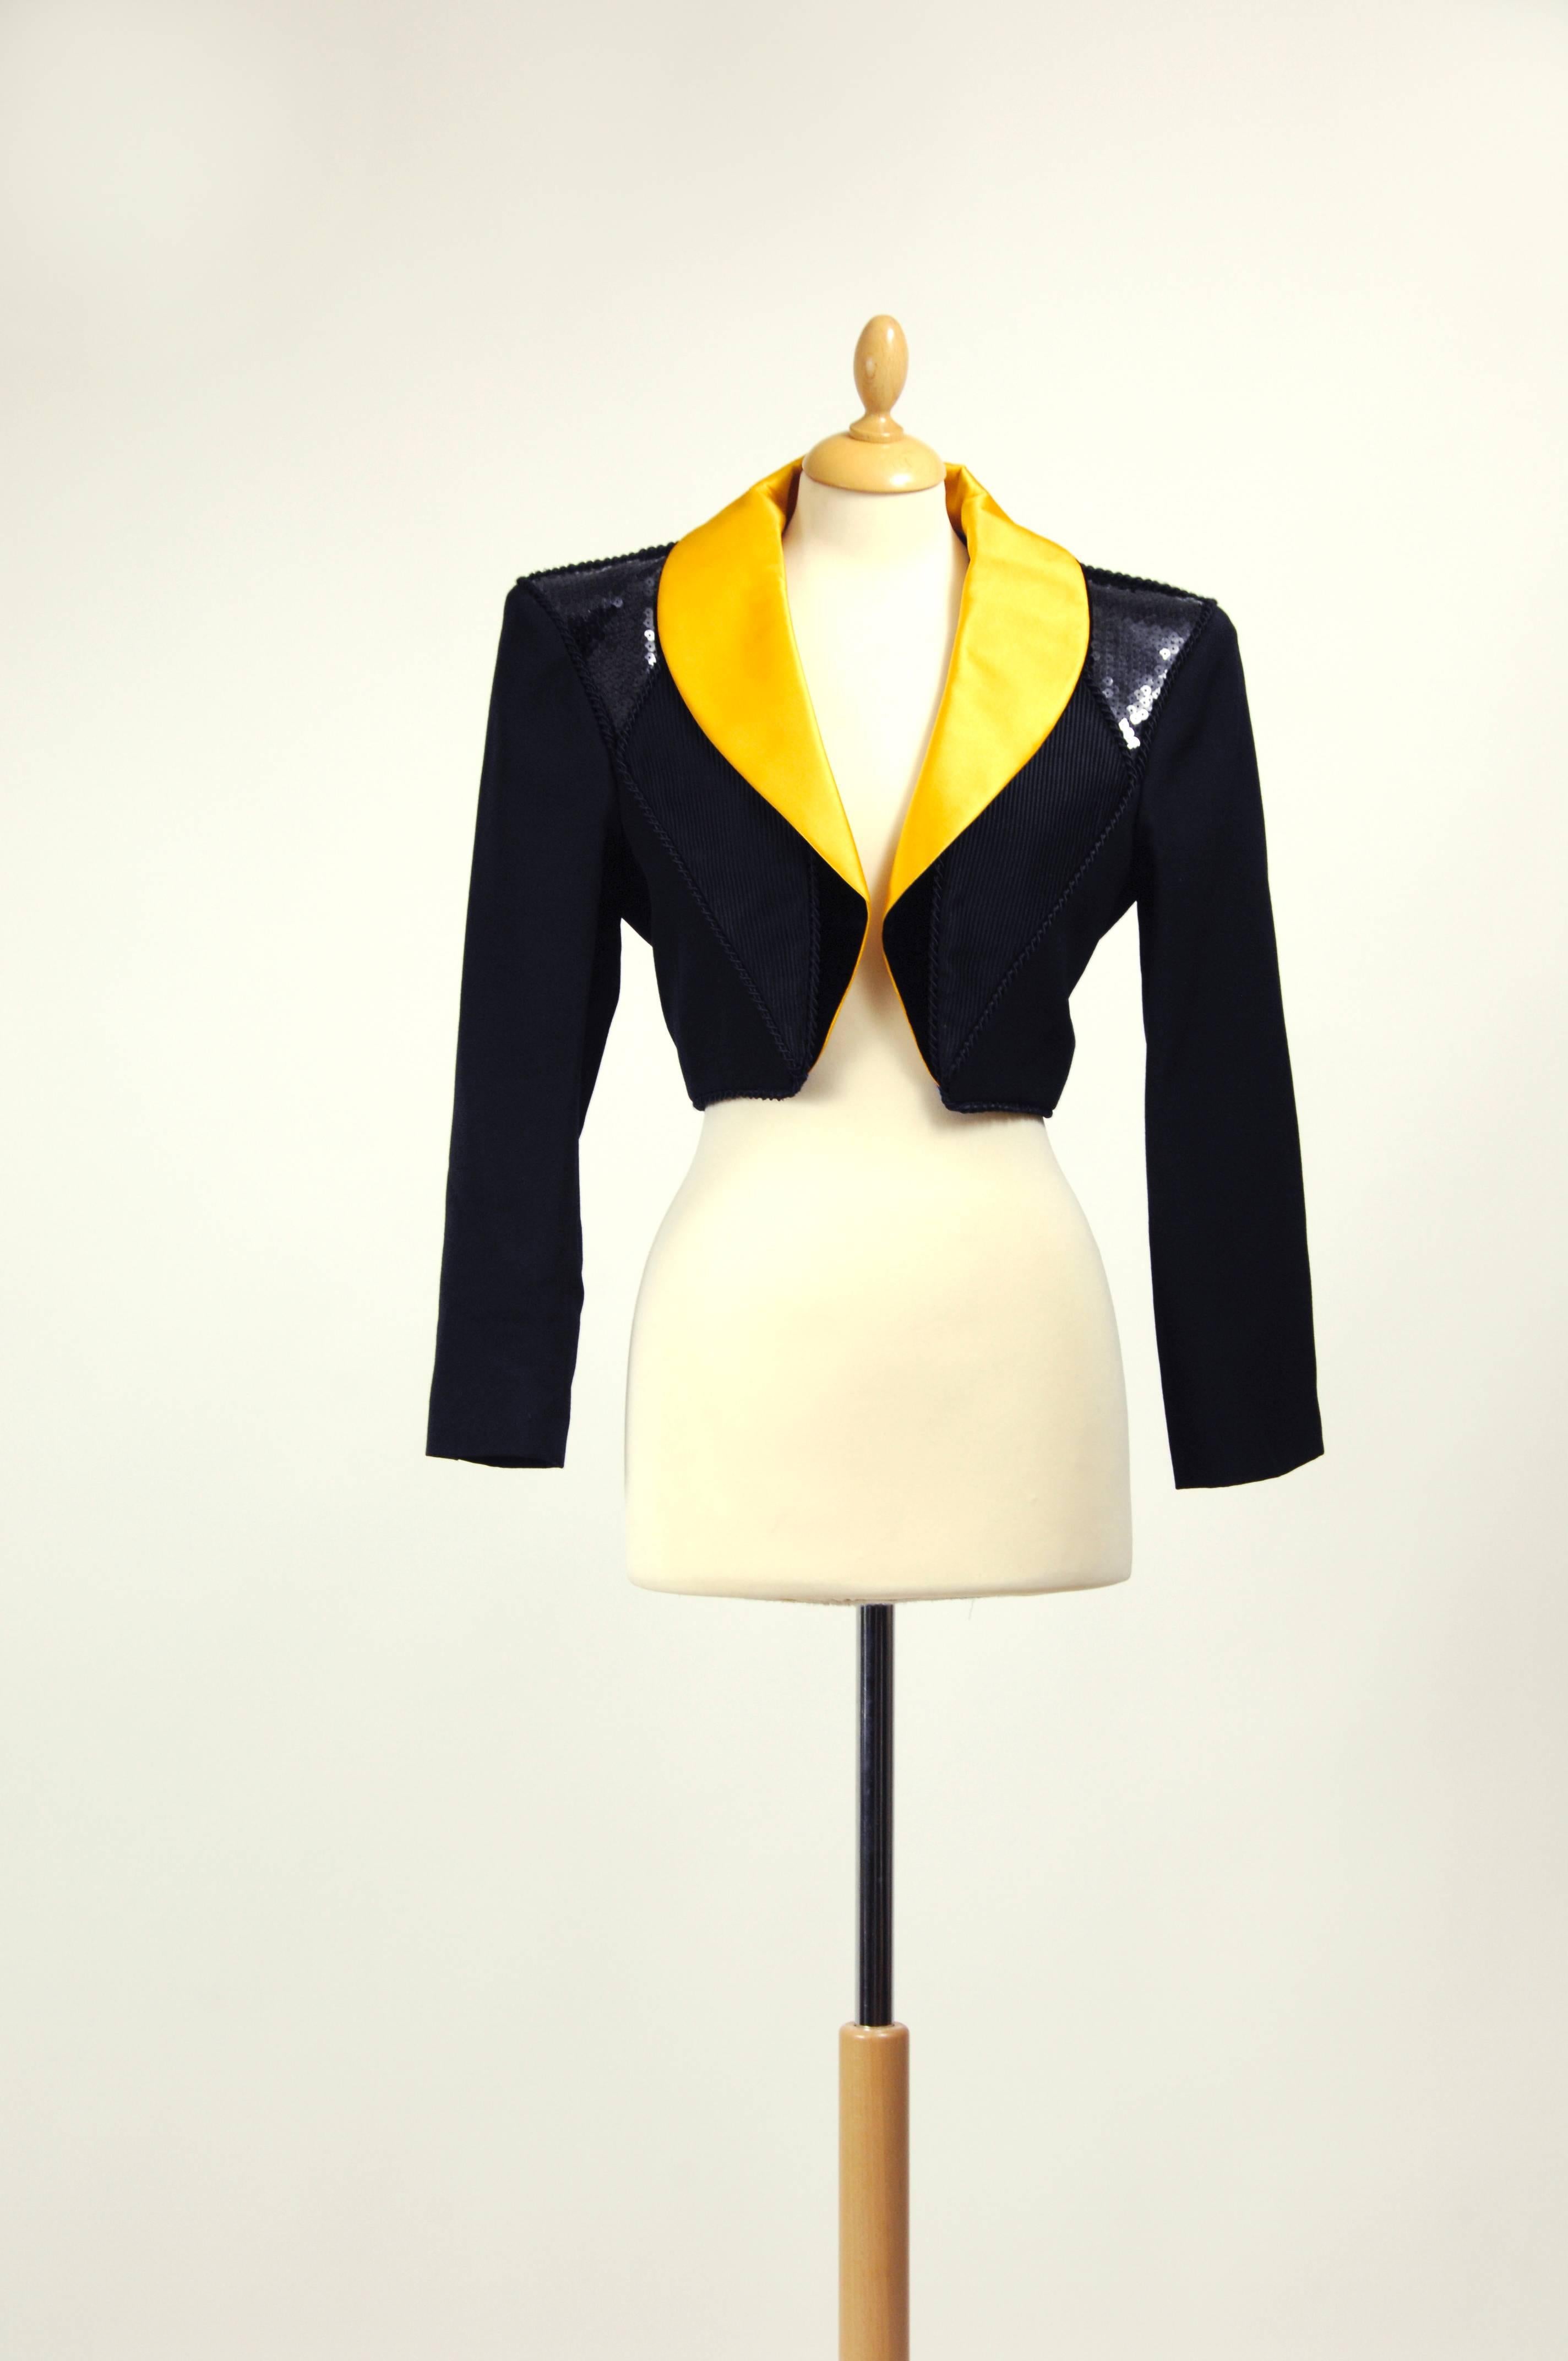 This gorgeous and iconic Yves Saint Laurent 1980s bolero jacket is in a black fabric with yellow satin collar and black sequins and velvet details. It has large padded shoulders, buttons in the cuffs and purple satin lined.

Measurement:
Label